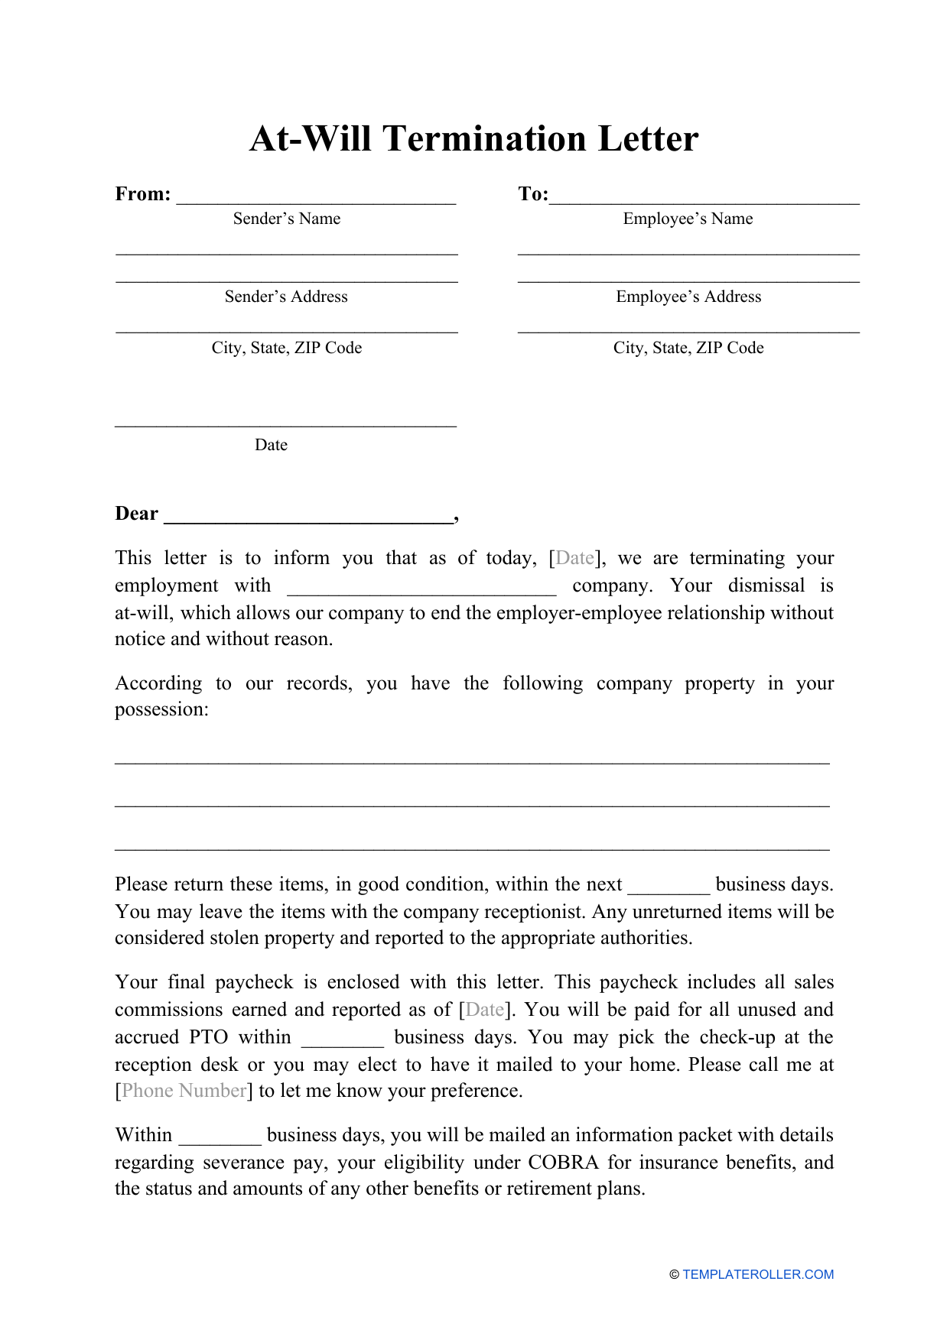 At-Will Termination Letter Template Image Preview